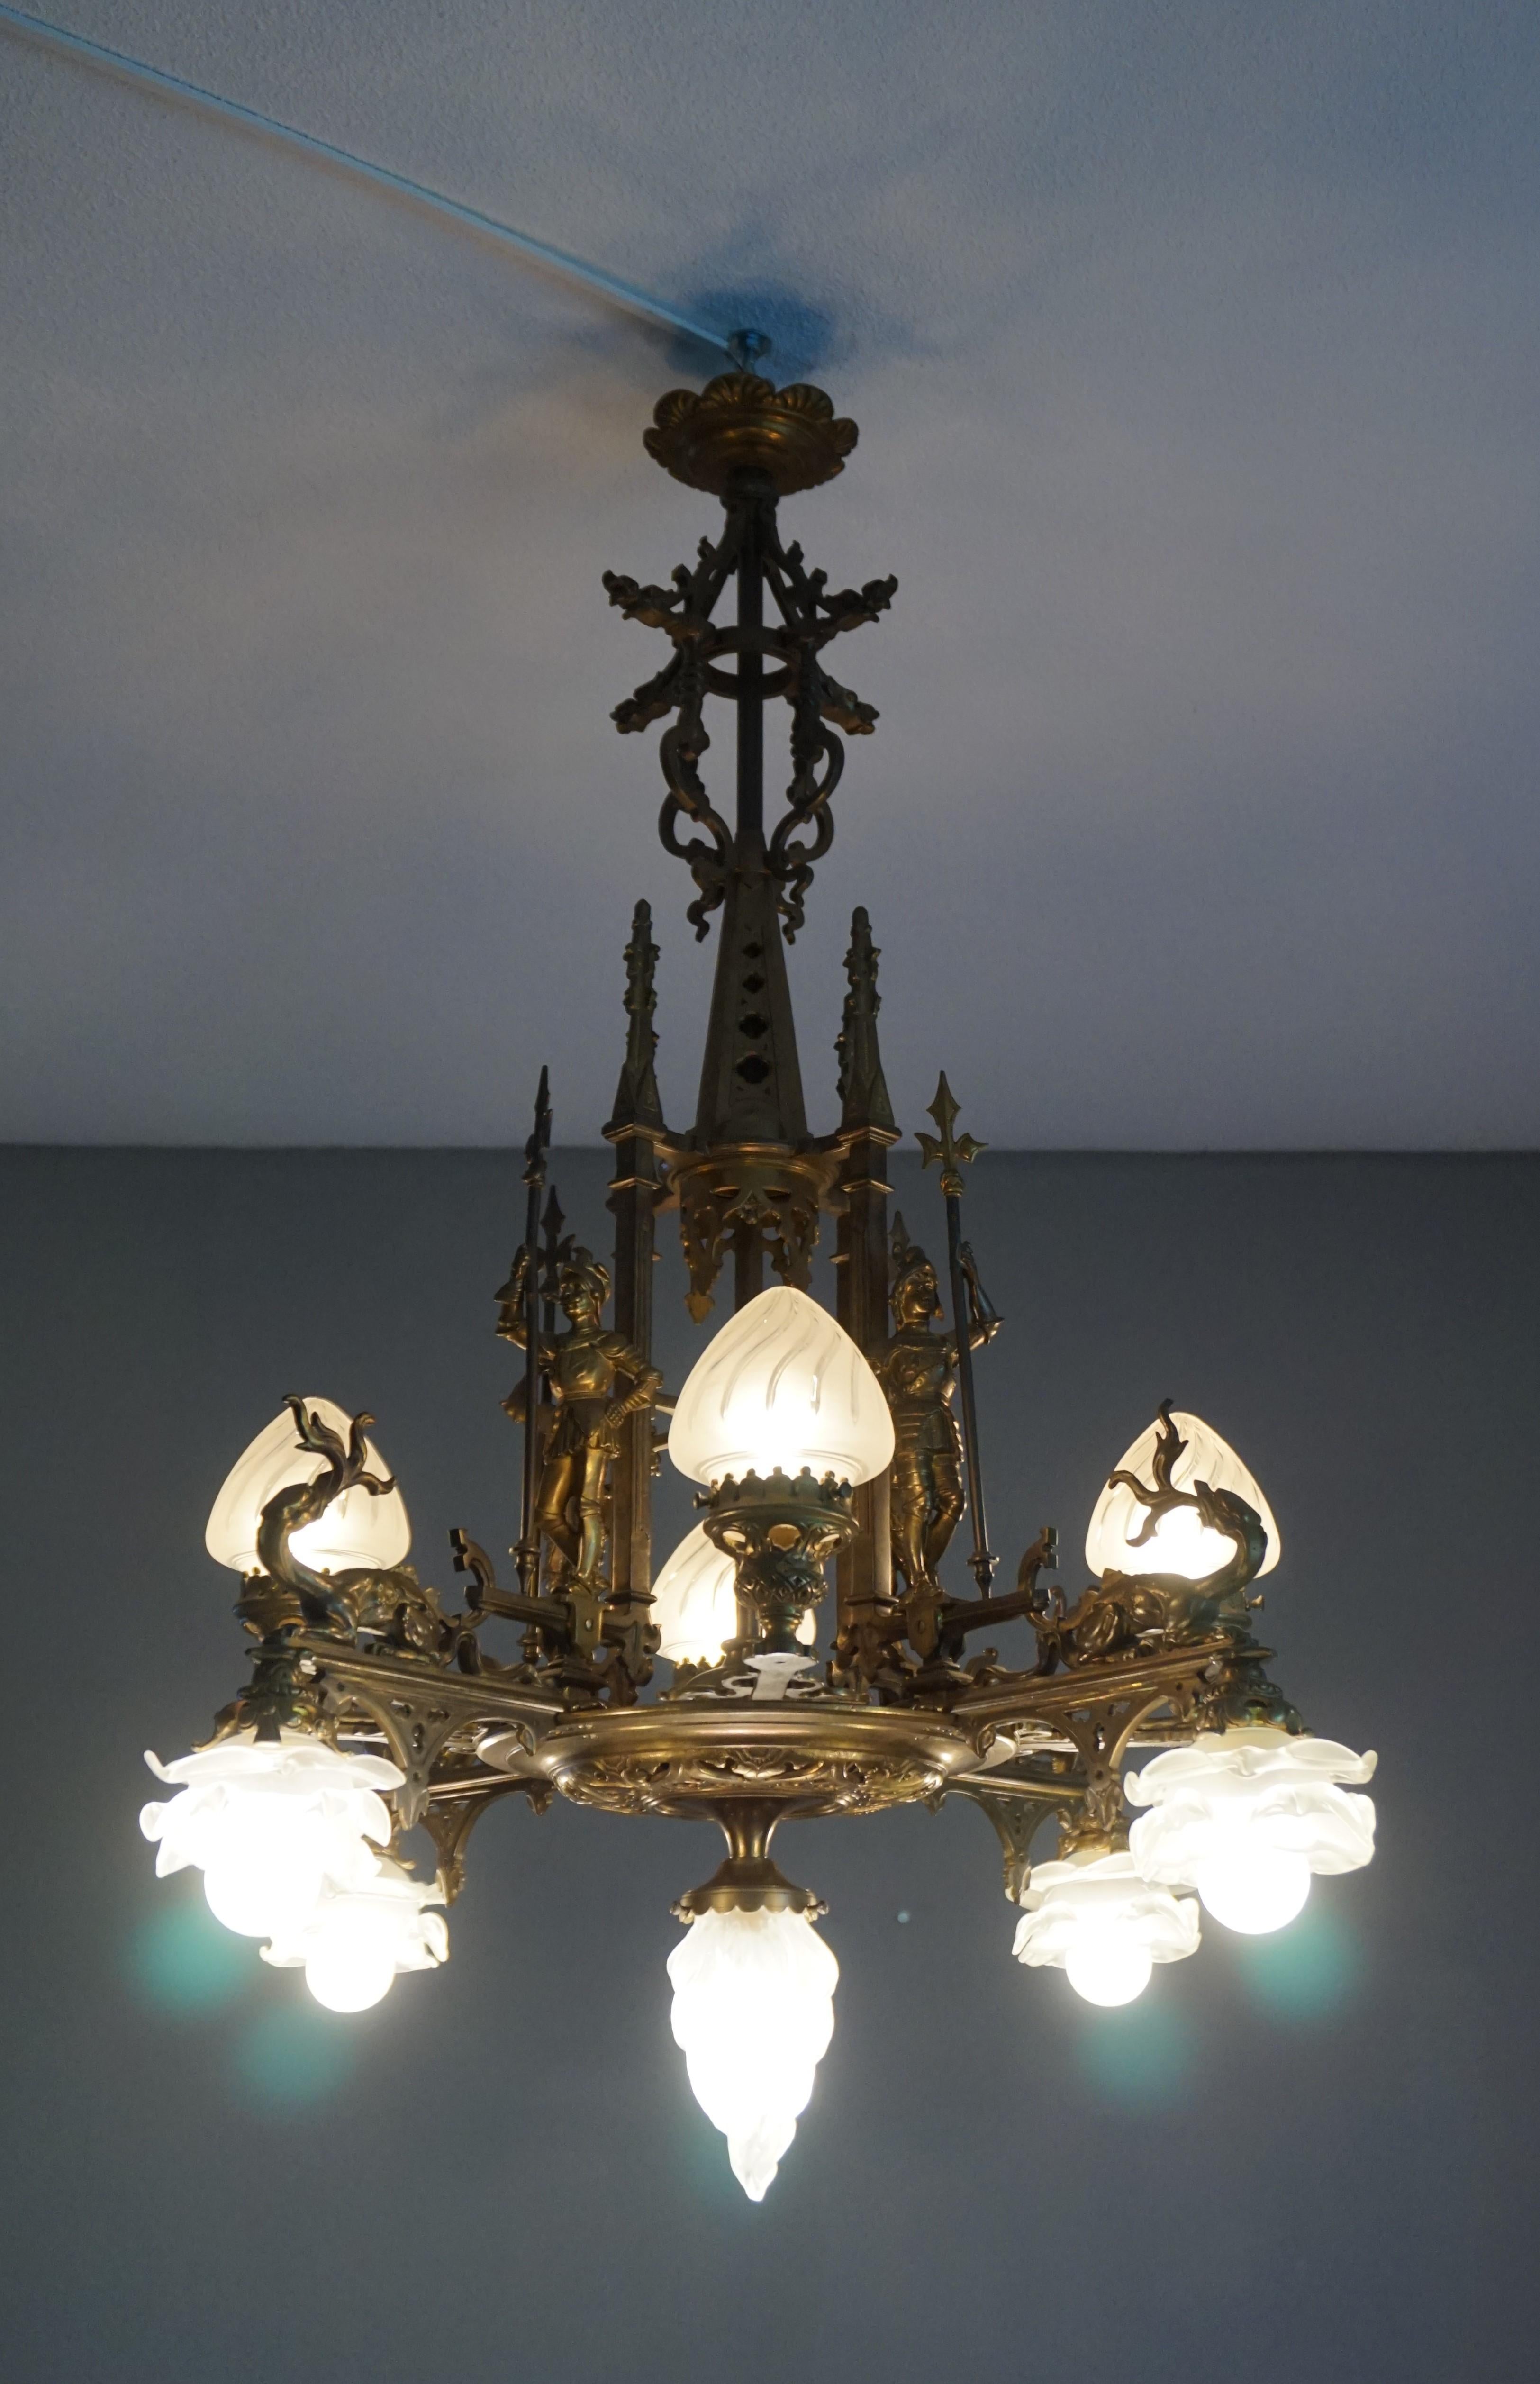 French Bronze Gothic Revival Chandelier / Pendant Light w. Knights & Dragons Sculptures